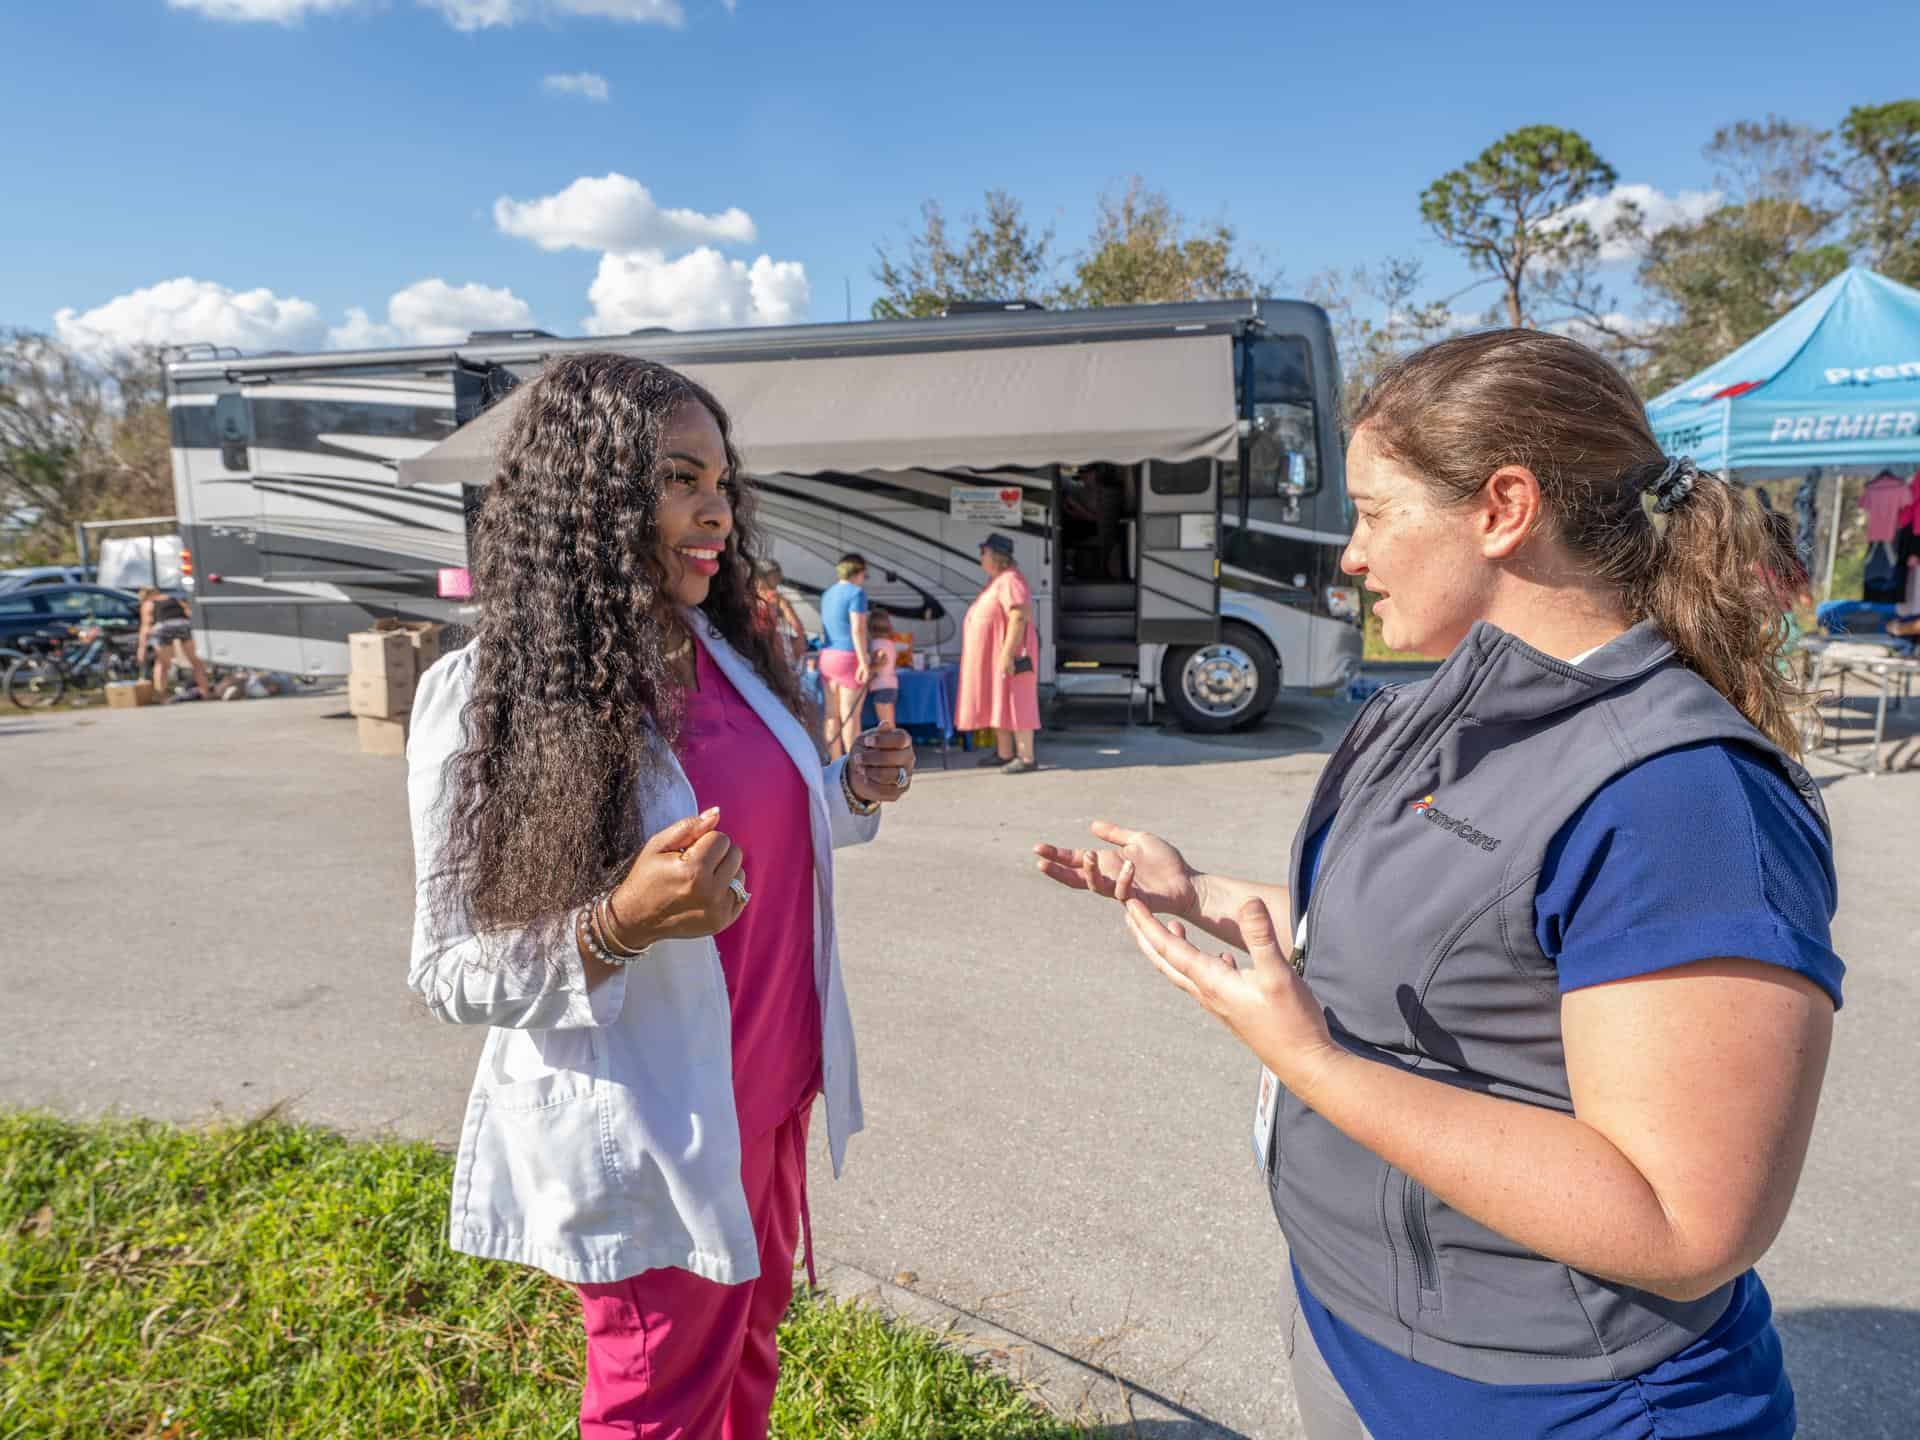 Deanie Singh, a registered, board-certified Nurse Practitioner and the Executive Director at Premier Mobile Health Services speaks with Mariel Fonteyn, Director, US Emergency Response Emergency Programs, in Ft. Meyers, Florida. October 4, 2022. (Photo: Mike Demas)